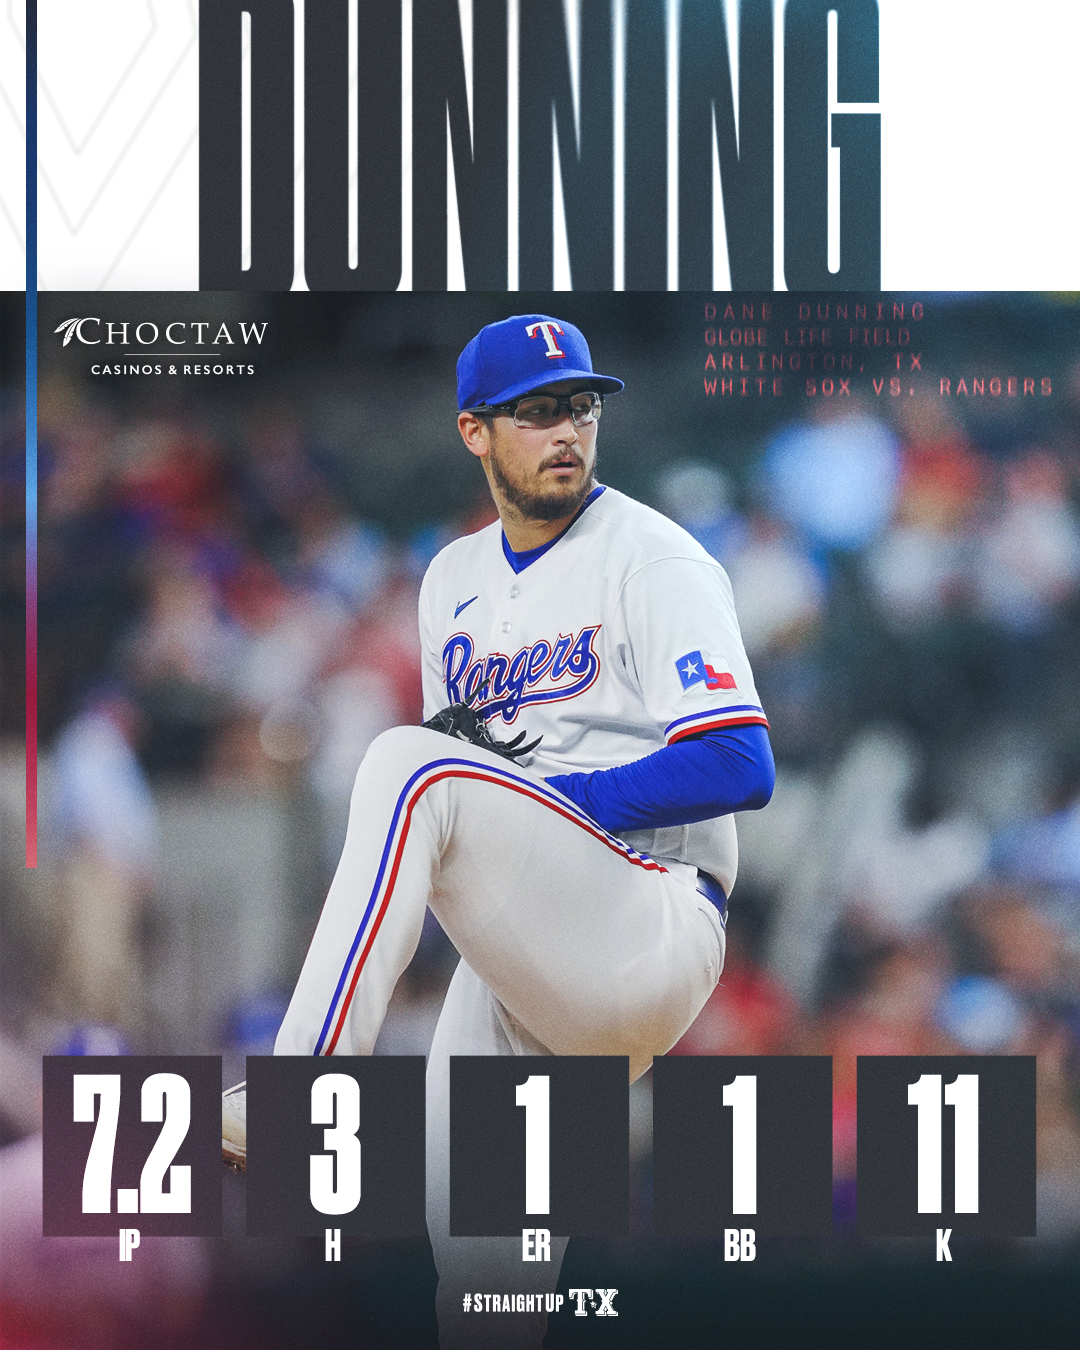 Texas Rangers on X: The Great Dane! 🔥 Dunning sets new career